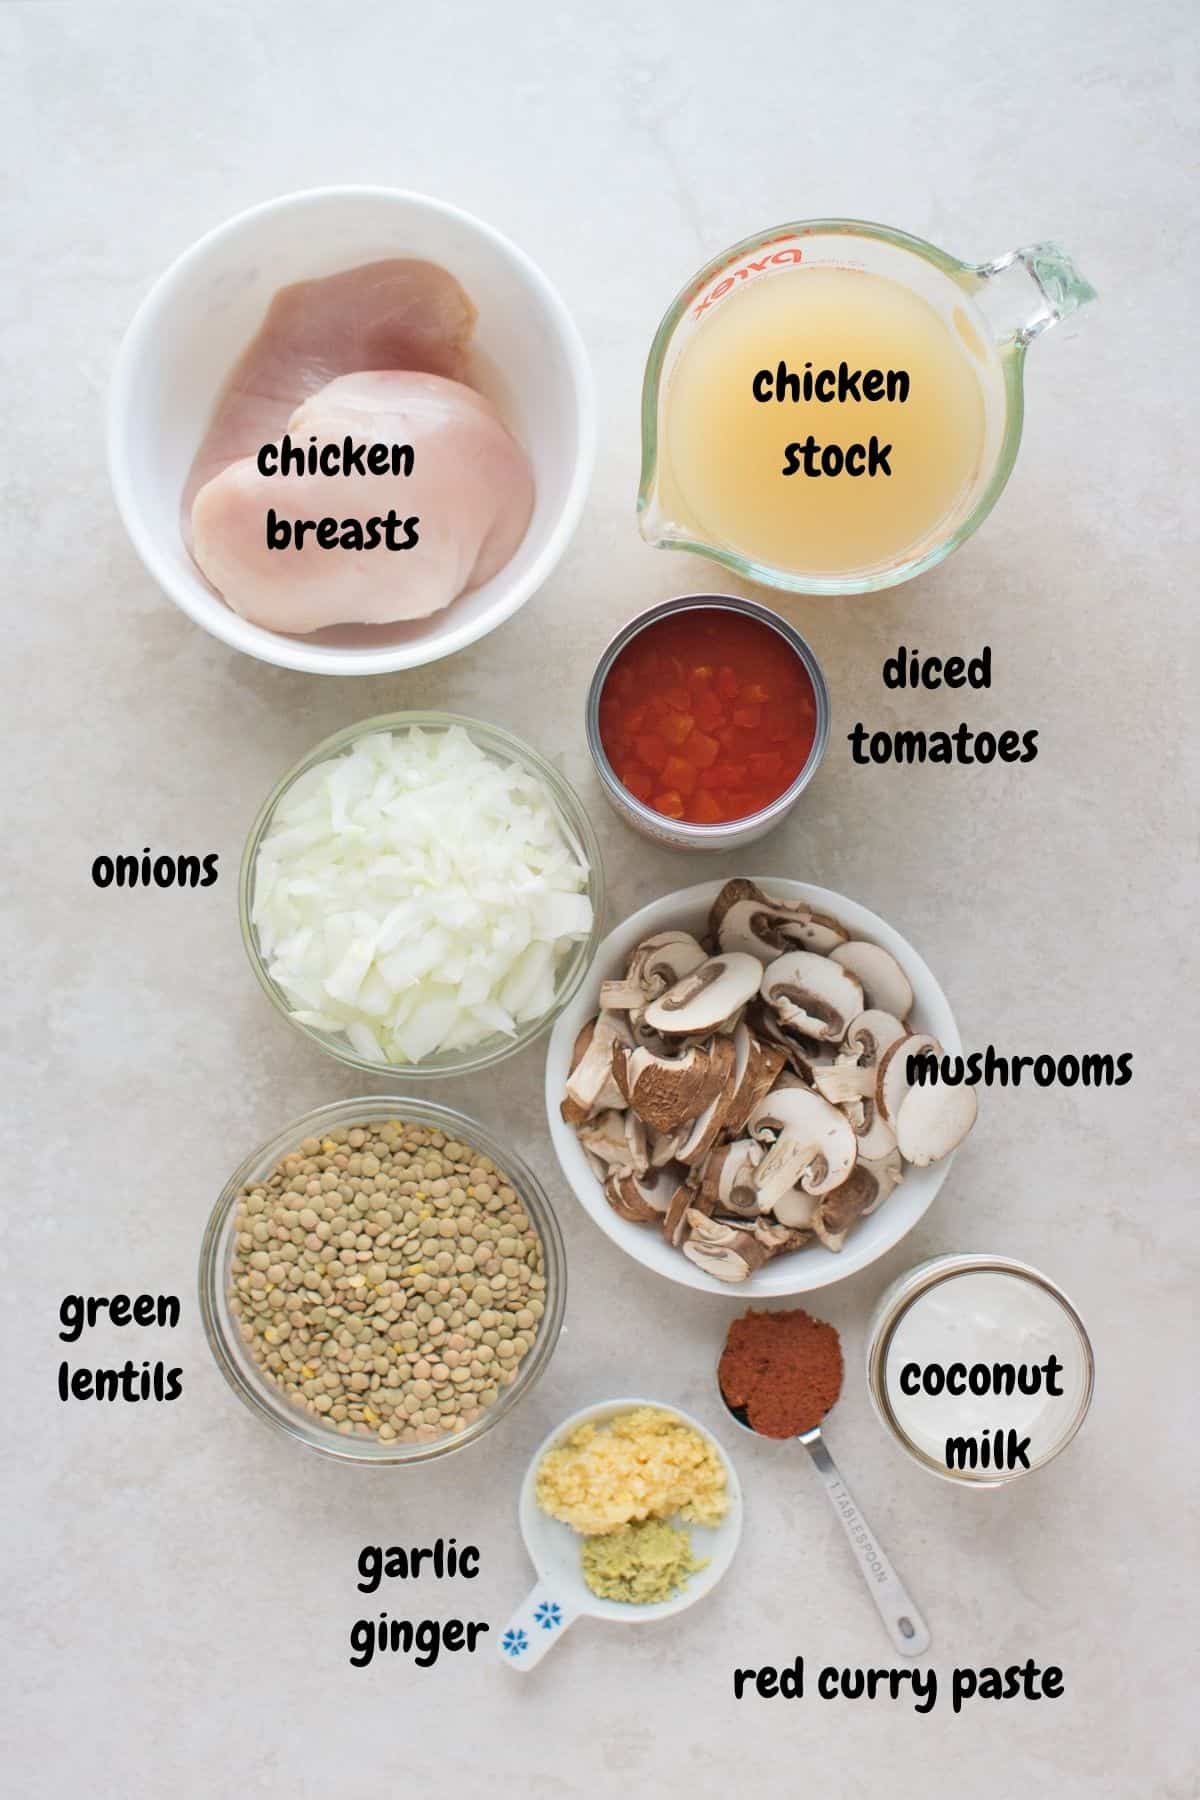 All the ingredients laid out on a white background.